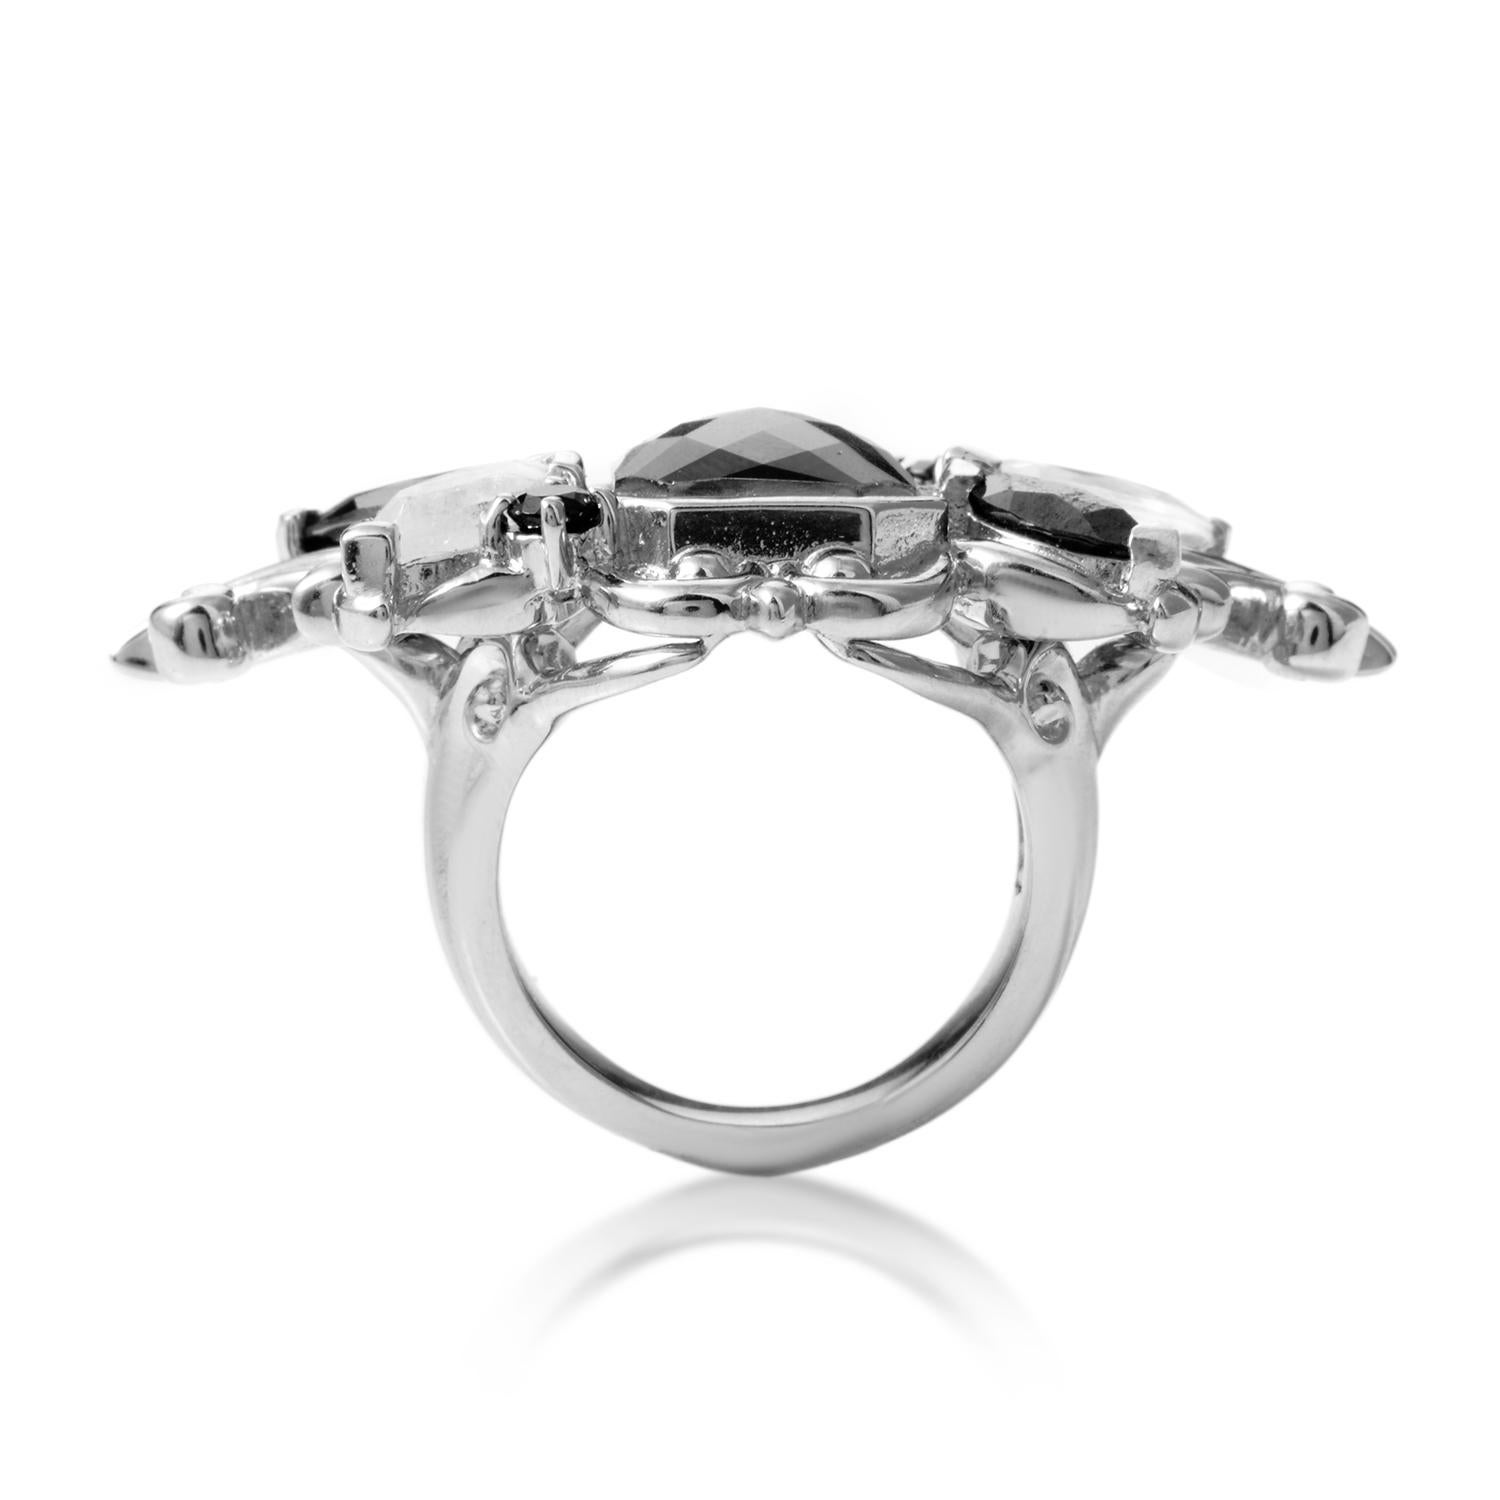 Exquisitely crafted from impeccable sterling silver and spectacularly designed in a sensationally intricate and offbeat manner, this gorgeous Stephen Webster ring from the brilliant 'Pop Superstud' collection offers eye-catching fashionable